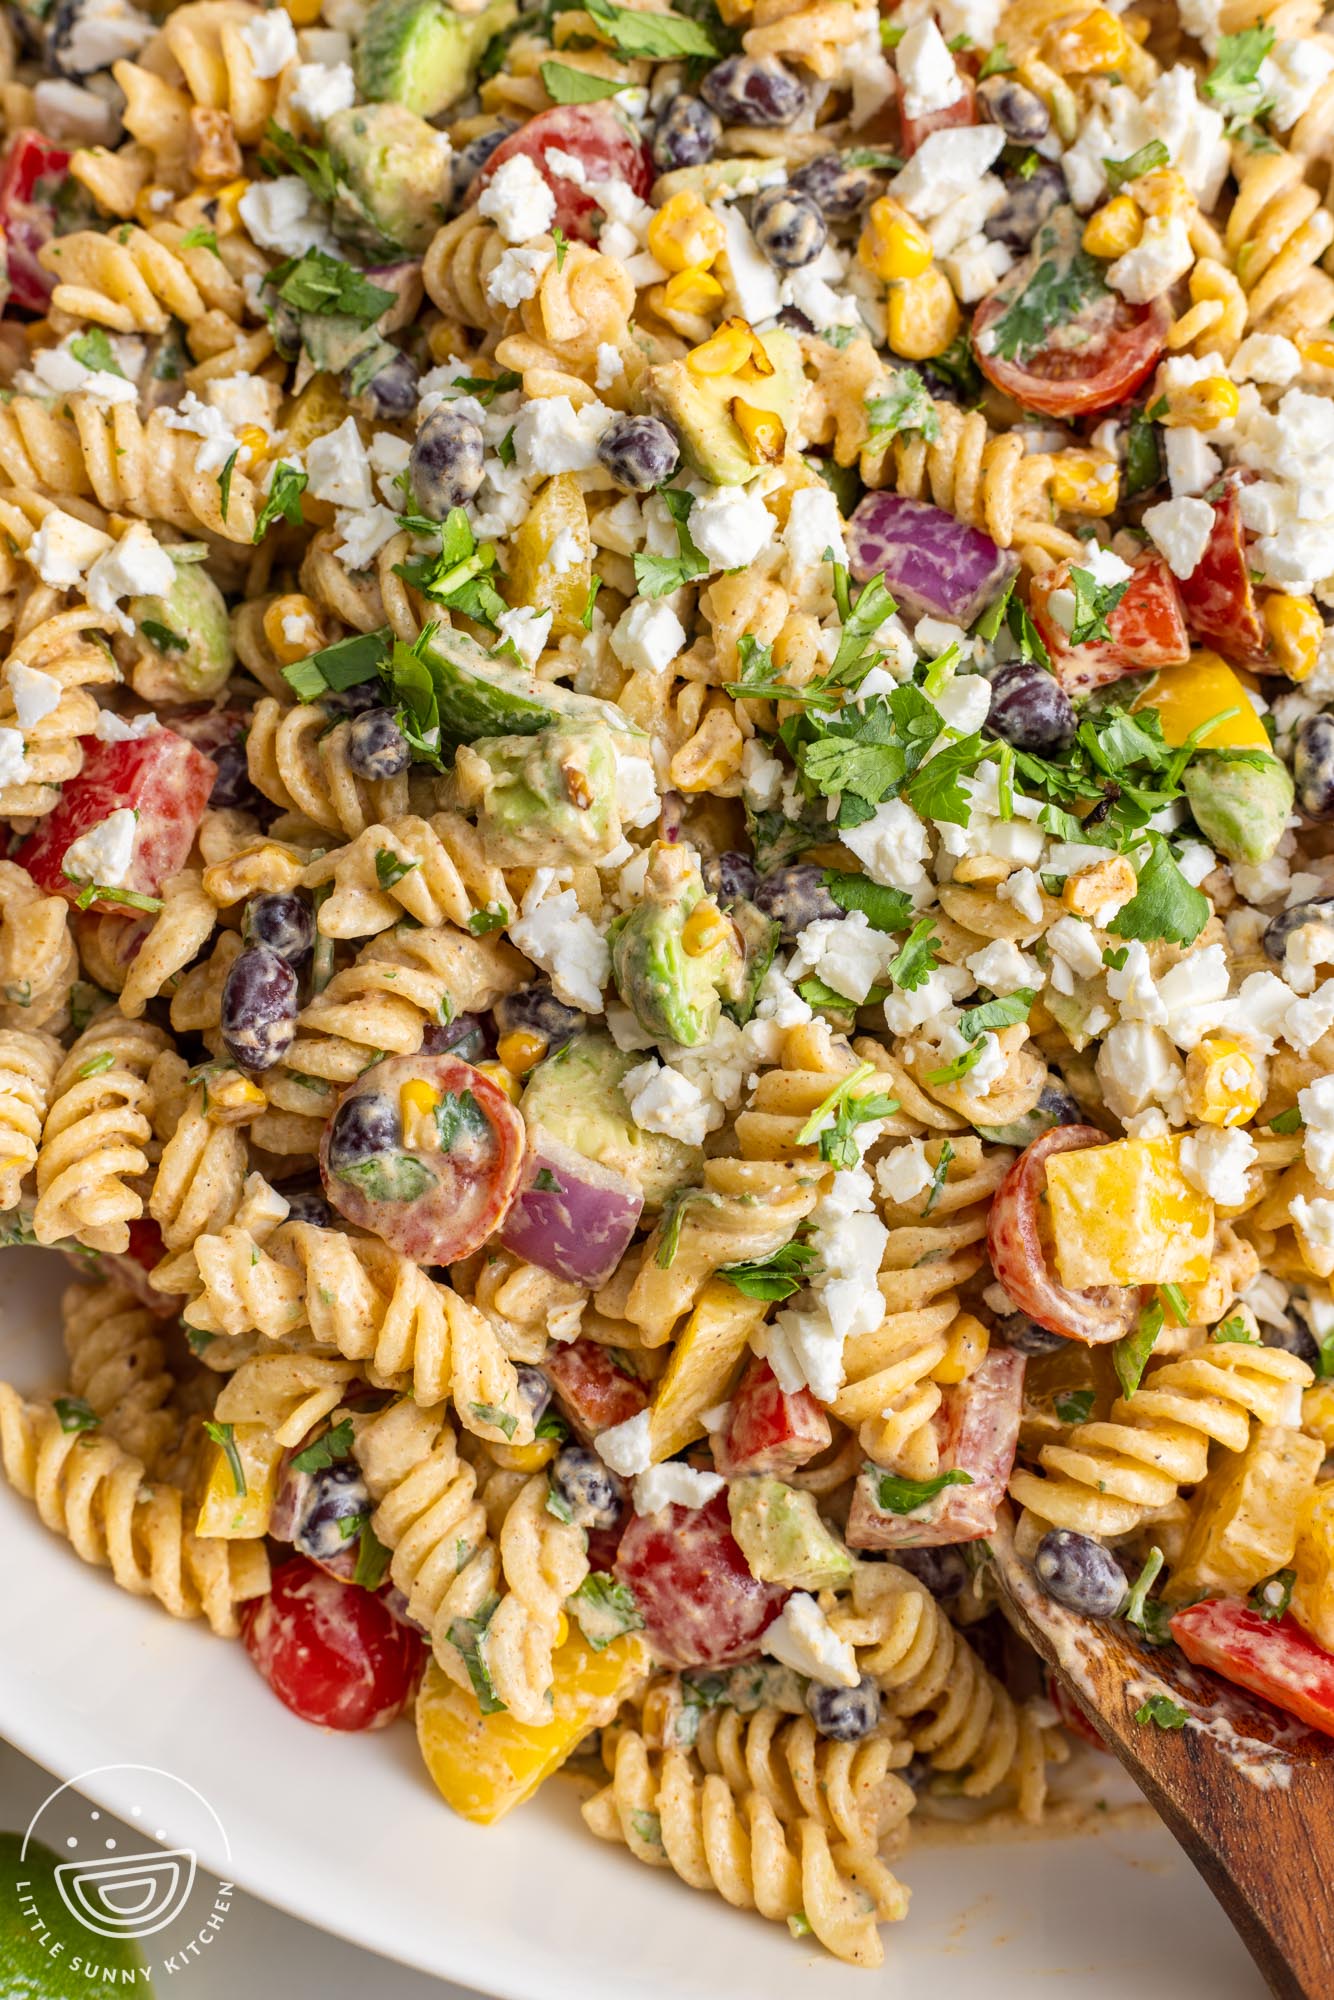 closeup of Mexican pasta salad. Rotini pasta in a creamy sauce with chopped bell peppers, avocado, tomatoes, corn, black beans, and crumbled cheese.